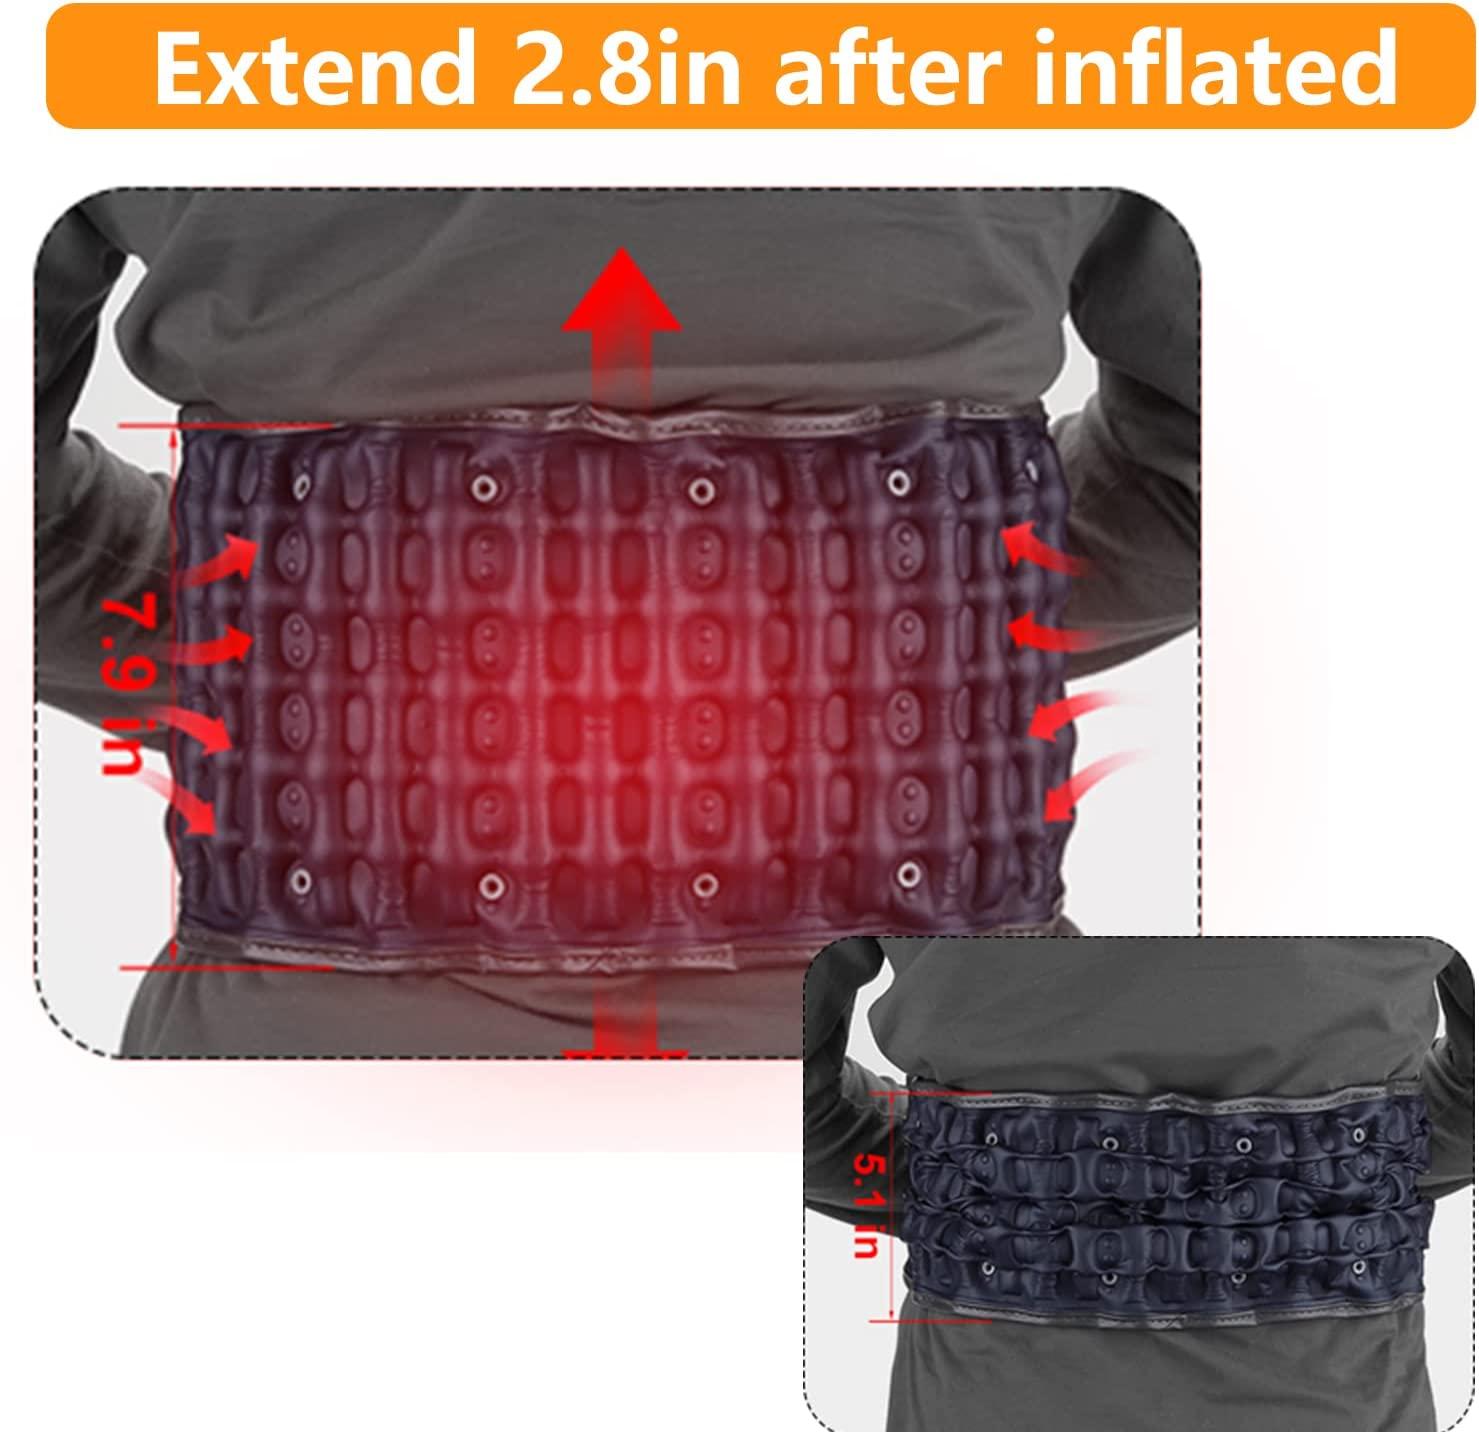 Heated Back Brace for Lower Back Pain Relief, HONGJING Back Belt with  Heating Operated by Rechargeable Battery, Lumbar Support for Sciatica and